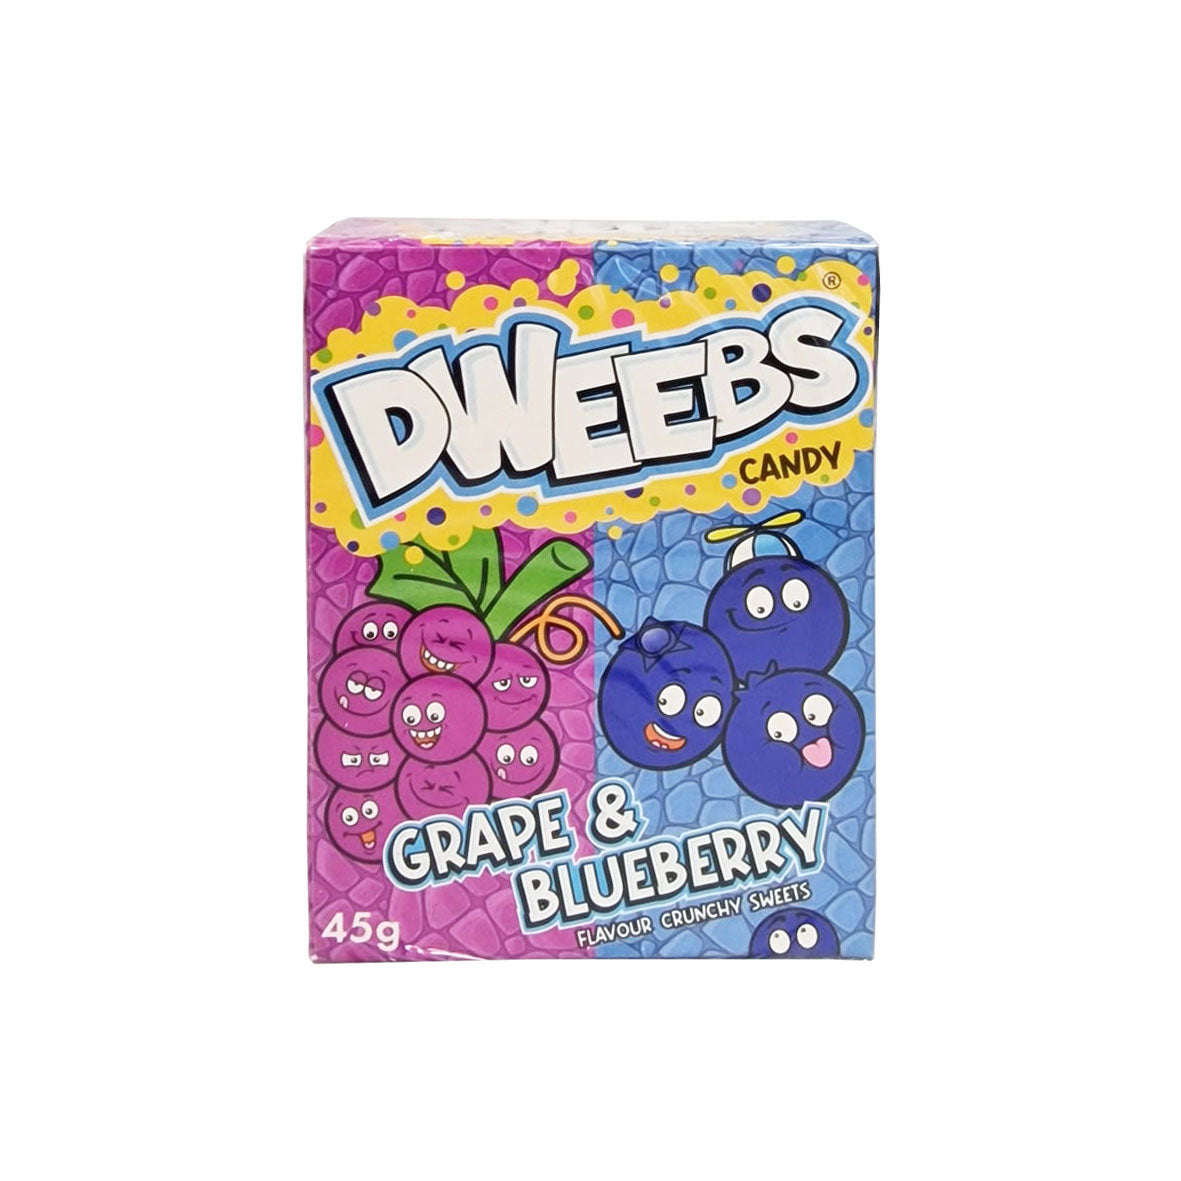 Dweebs Candy - Grape & Blueberry